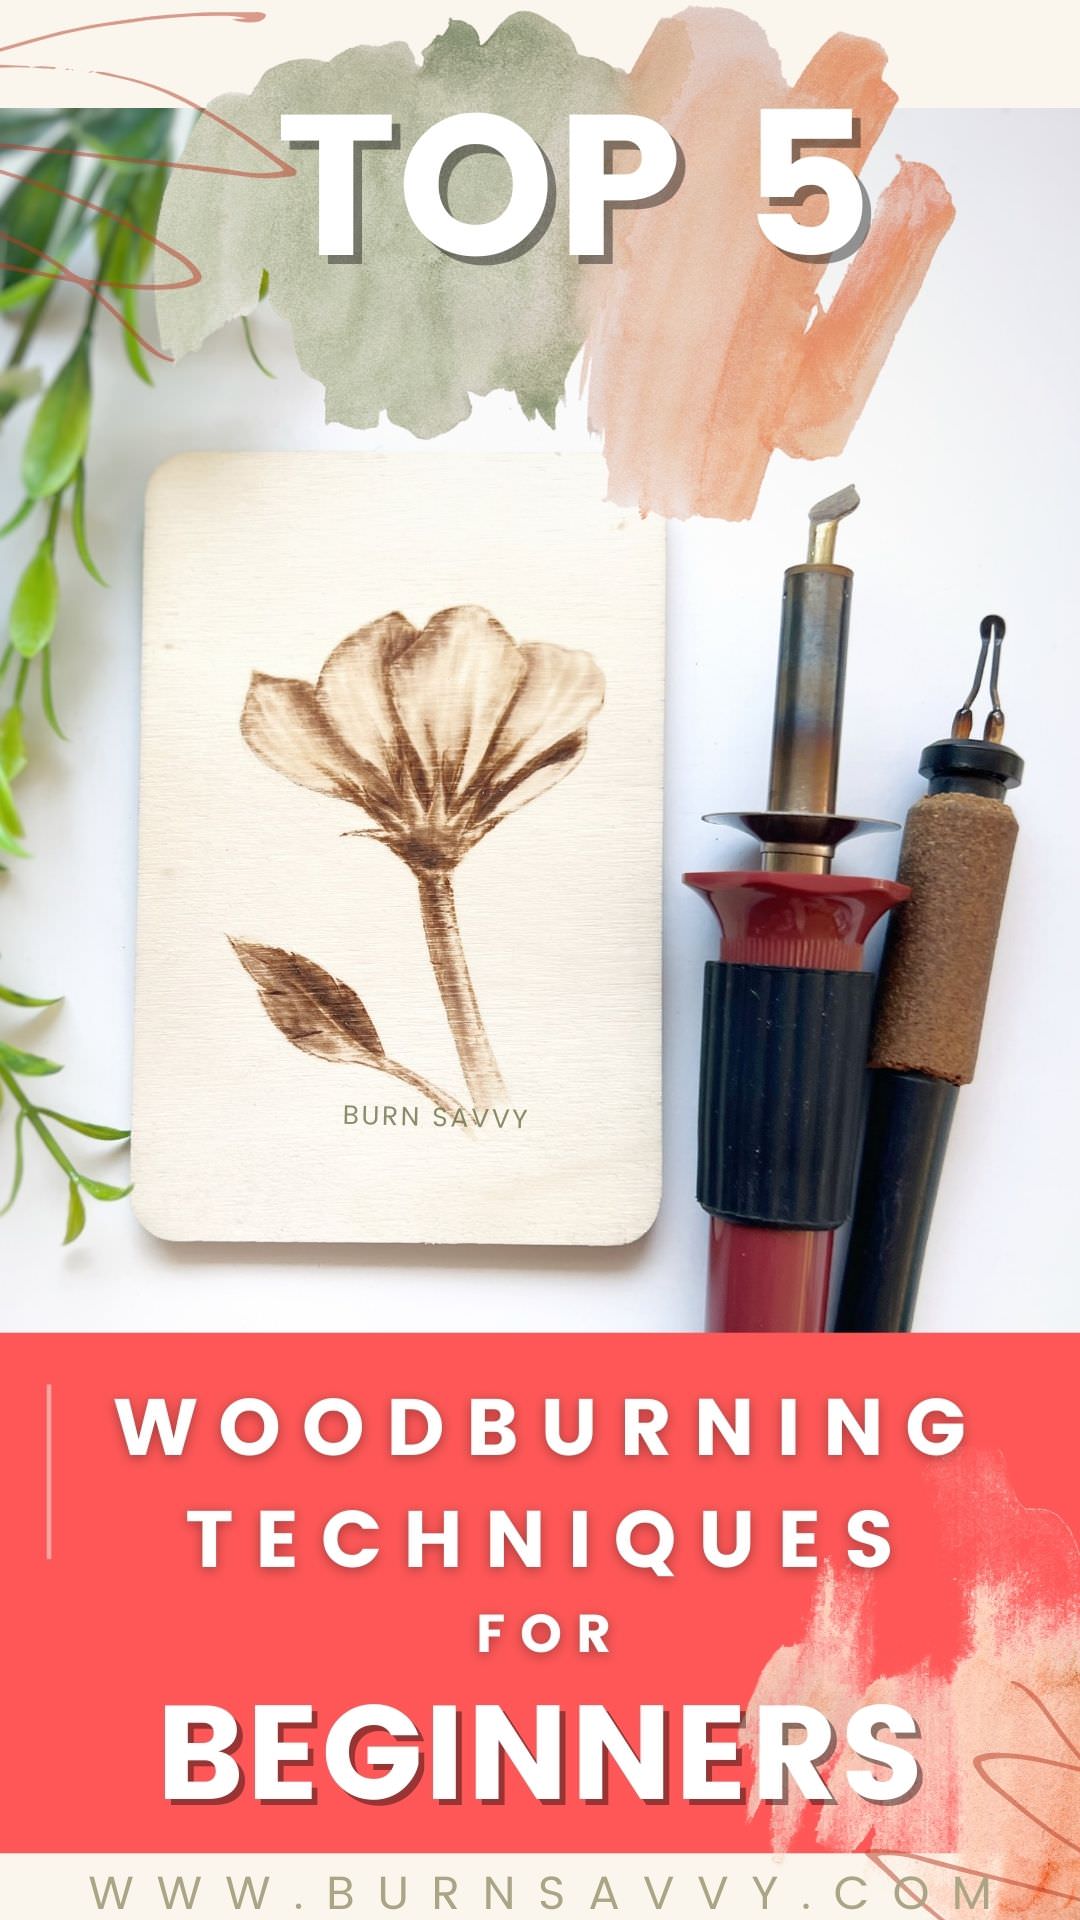 Woodburning techniques top 5 with flower